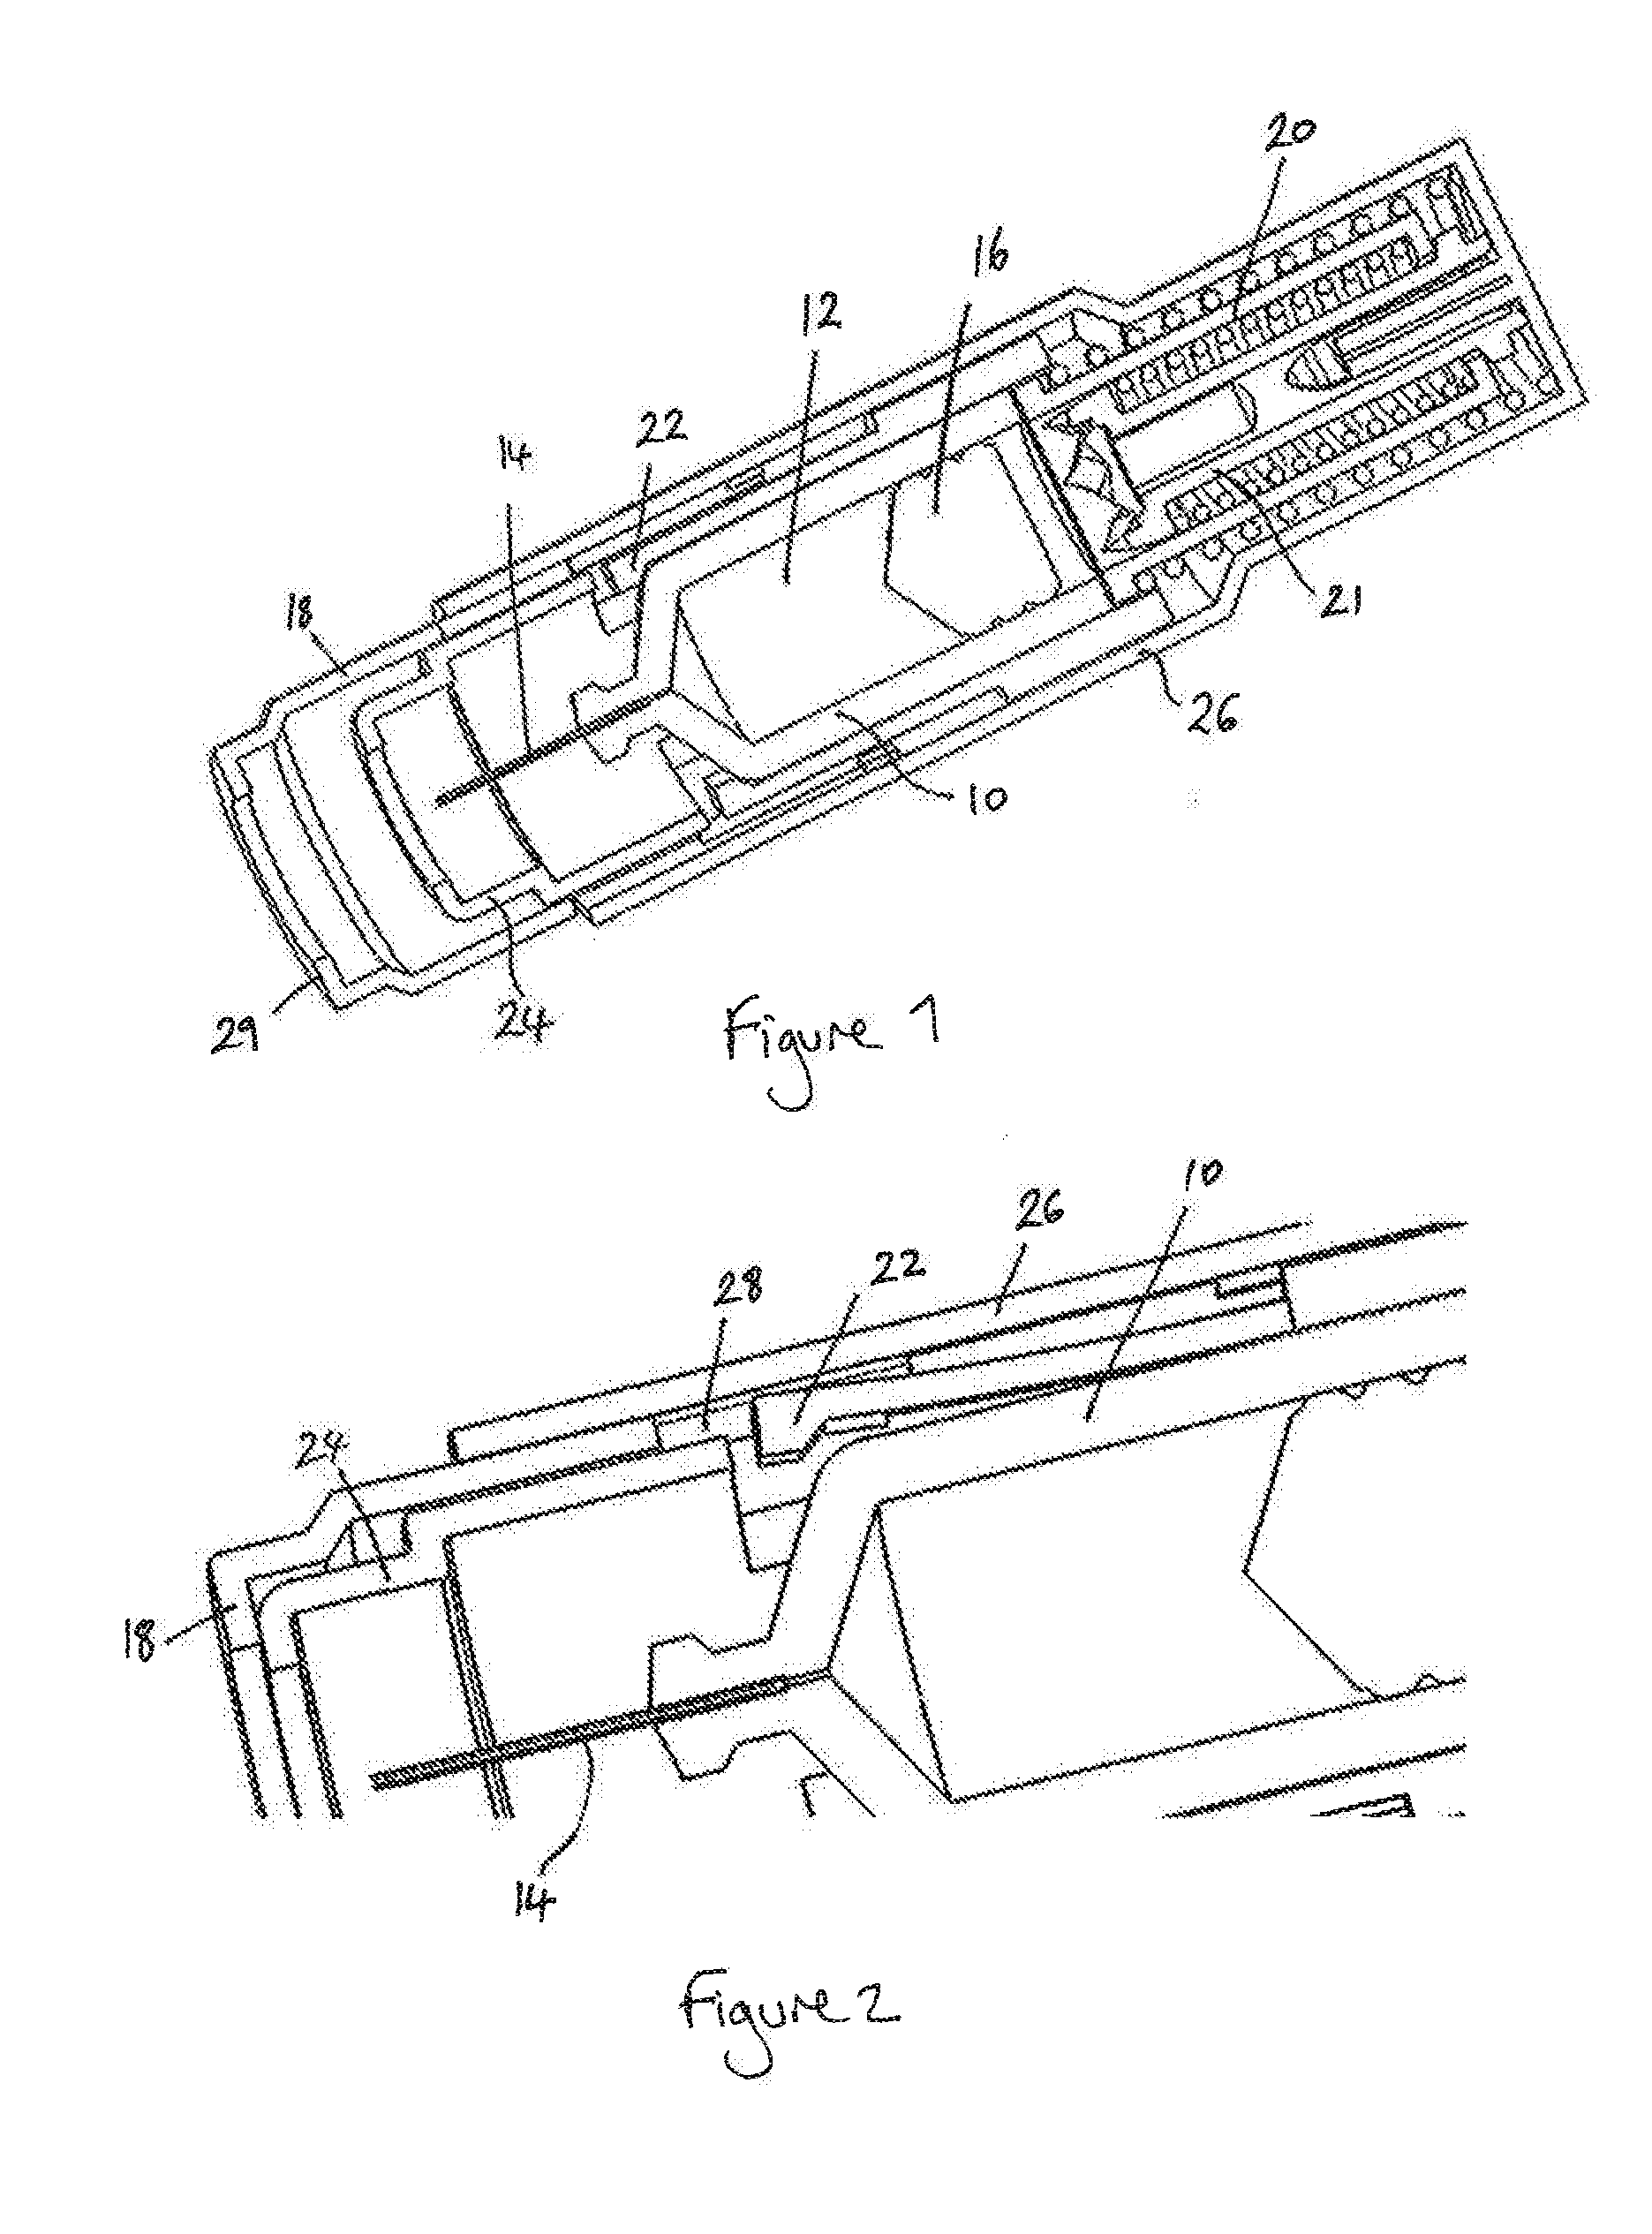 Injector device with mechanism for preventing accidental activation